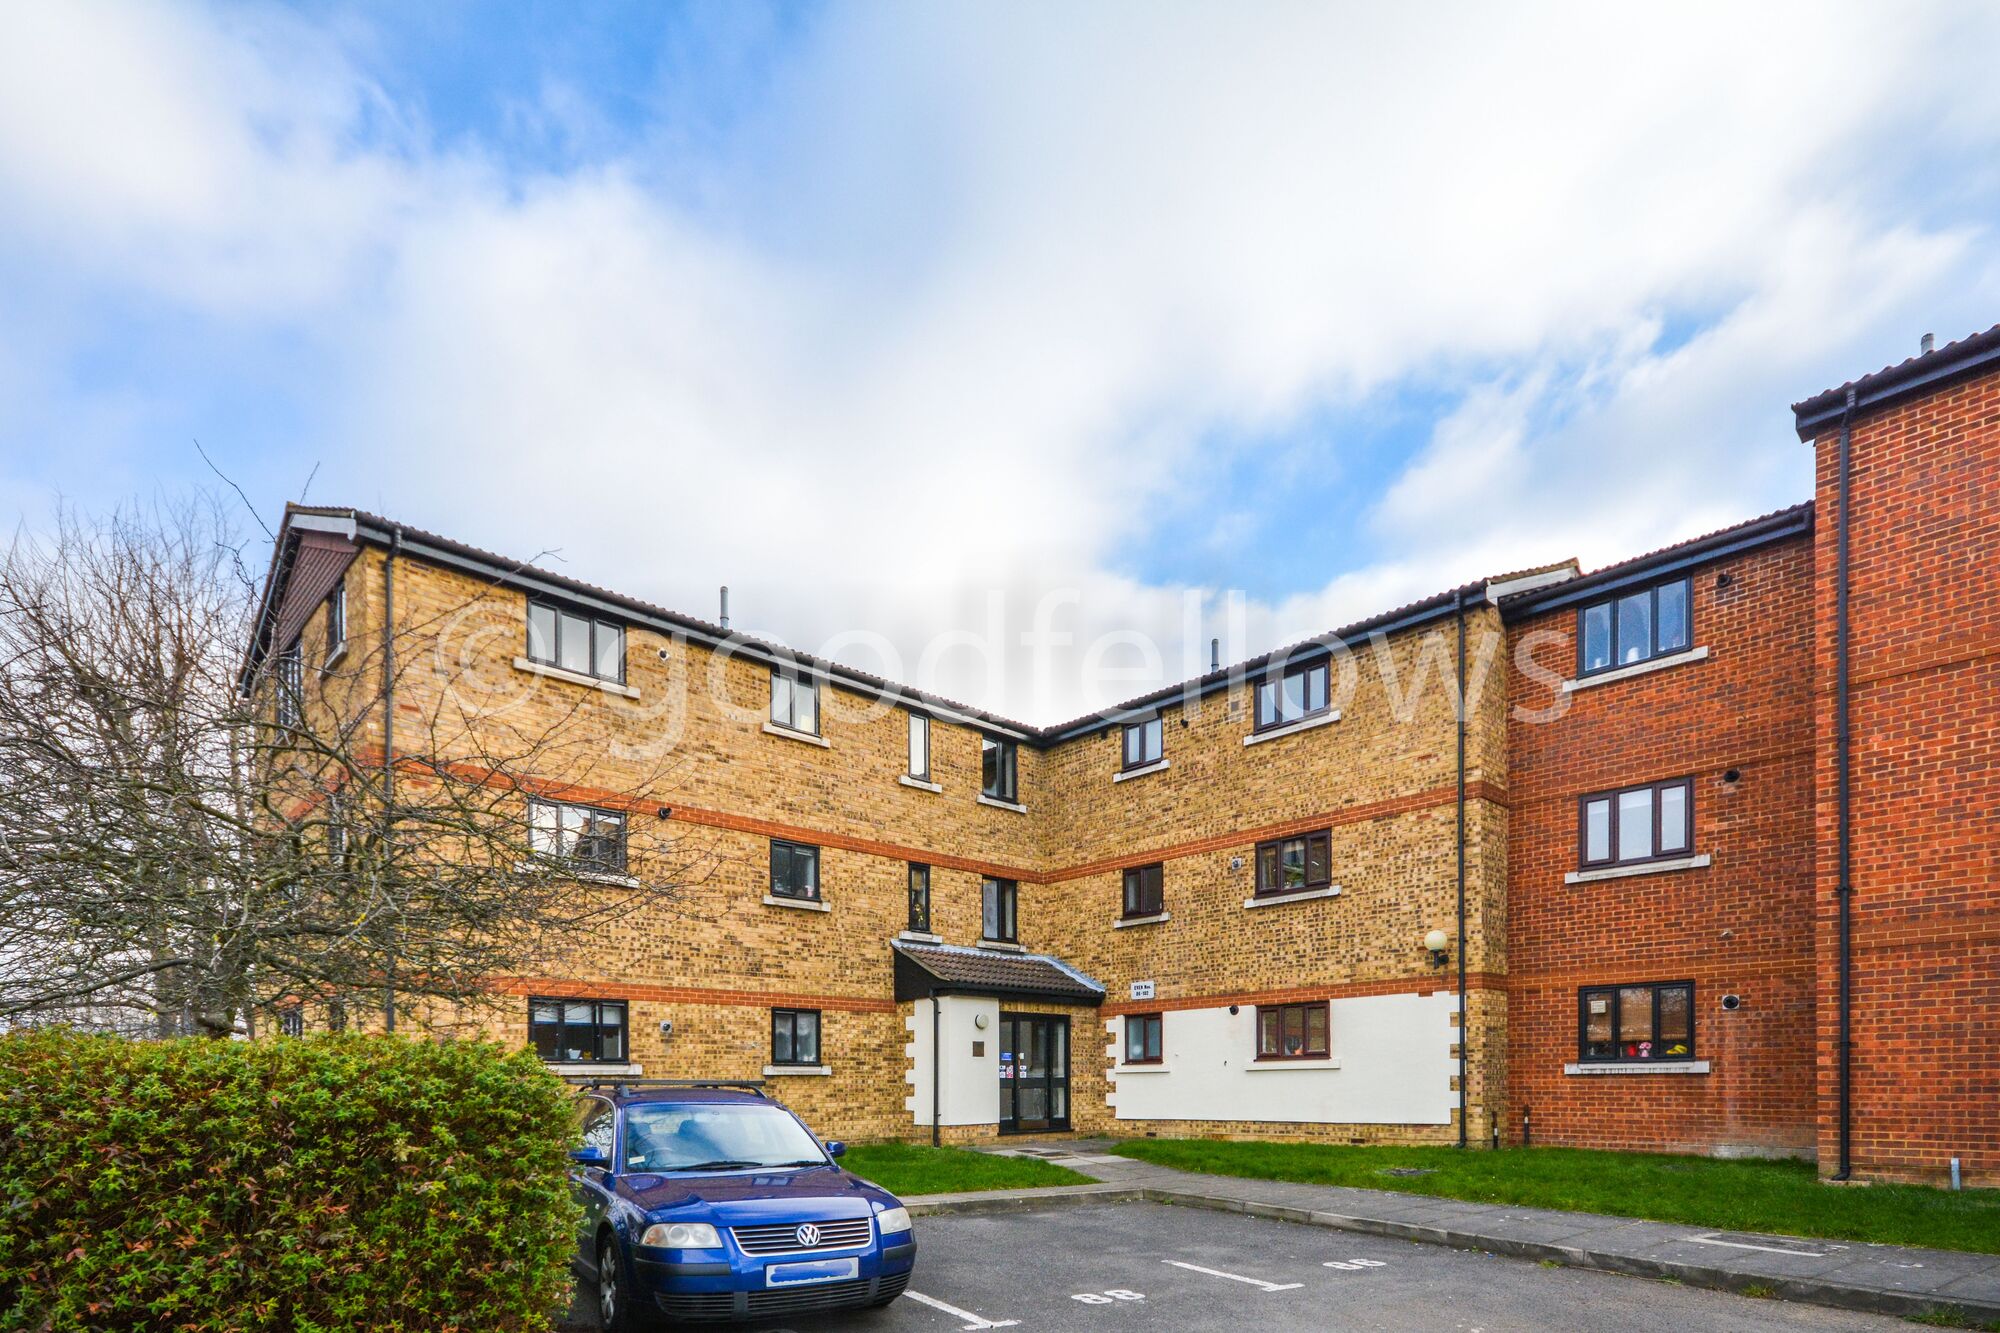 2 bedroom  flat to rent, Available now Birchwood Close, Morden, SM4, main image